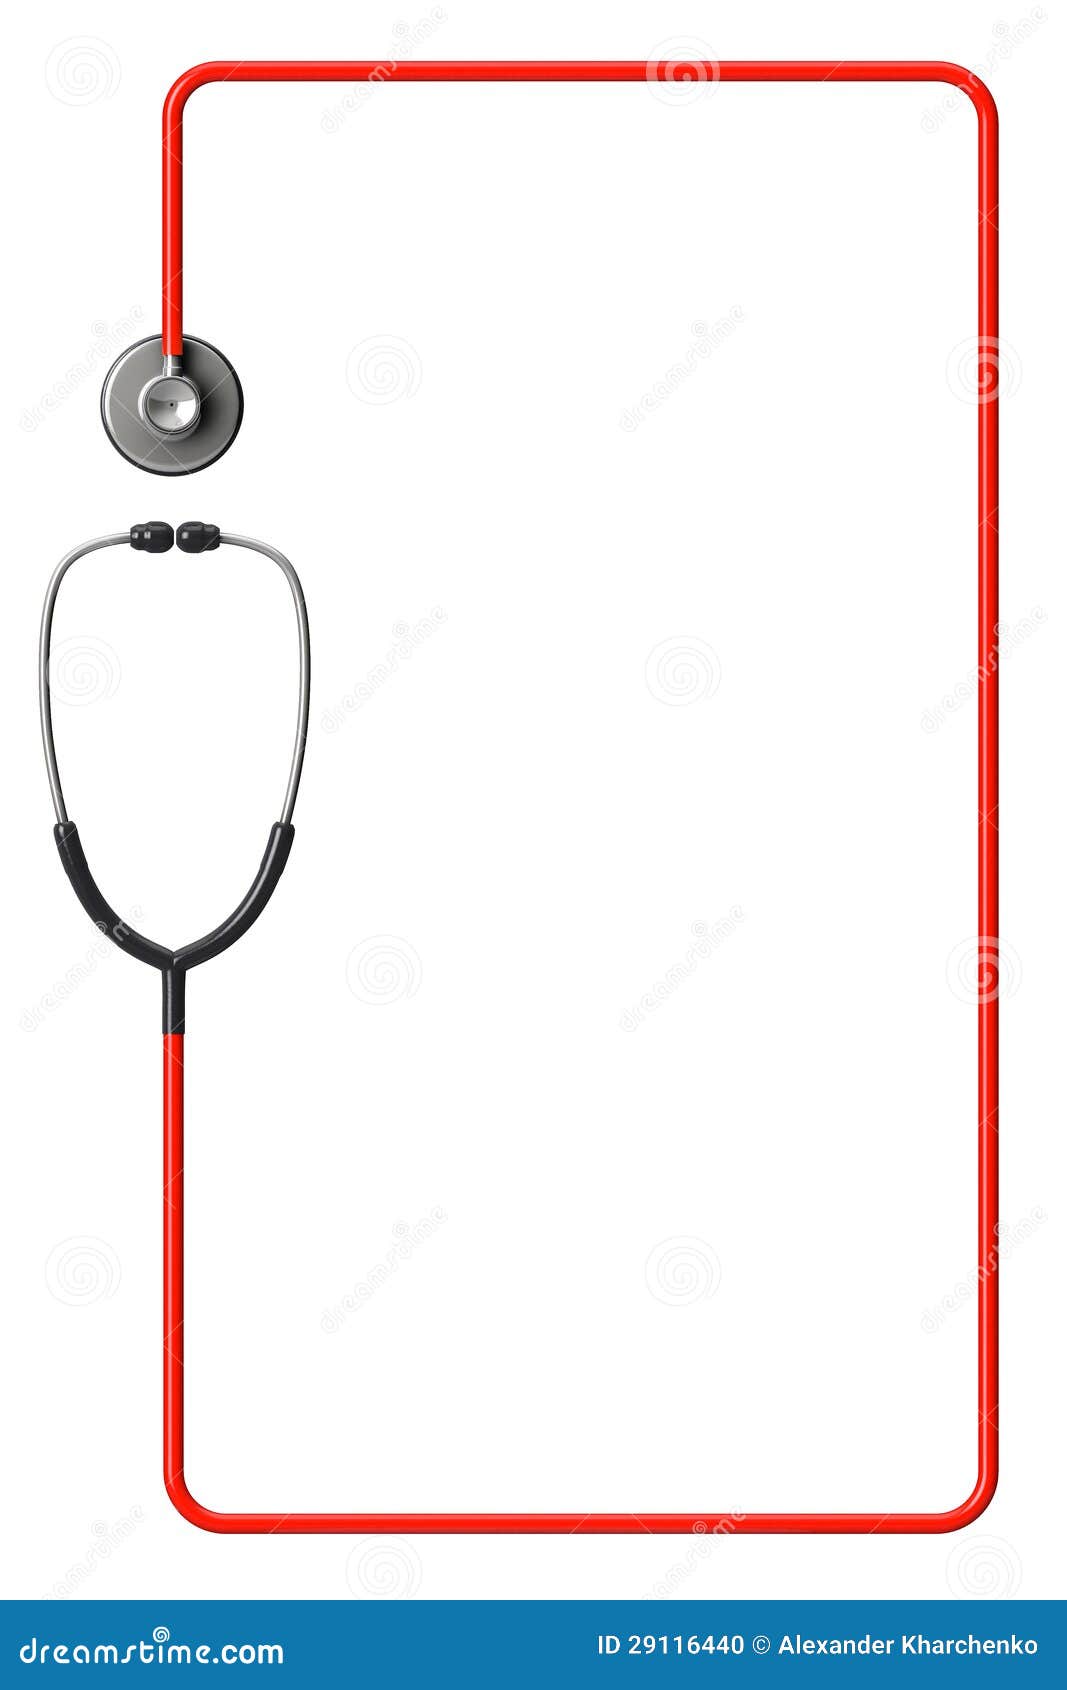 stethoscope in red as frame